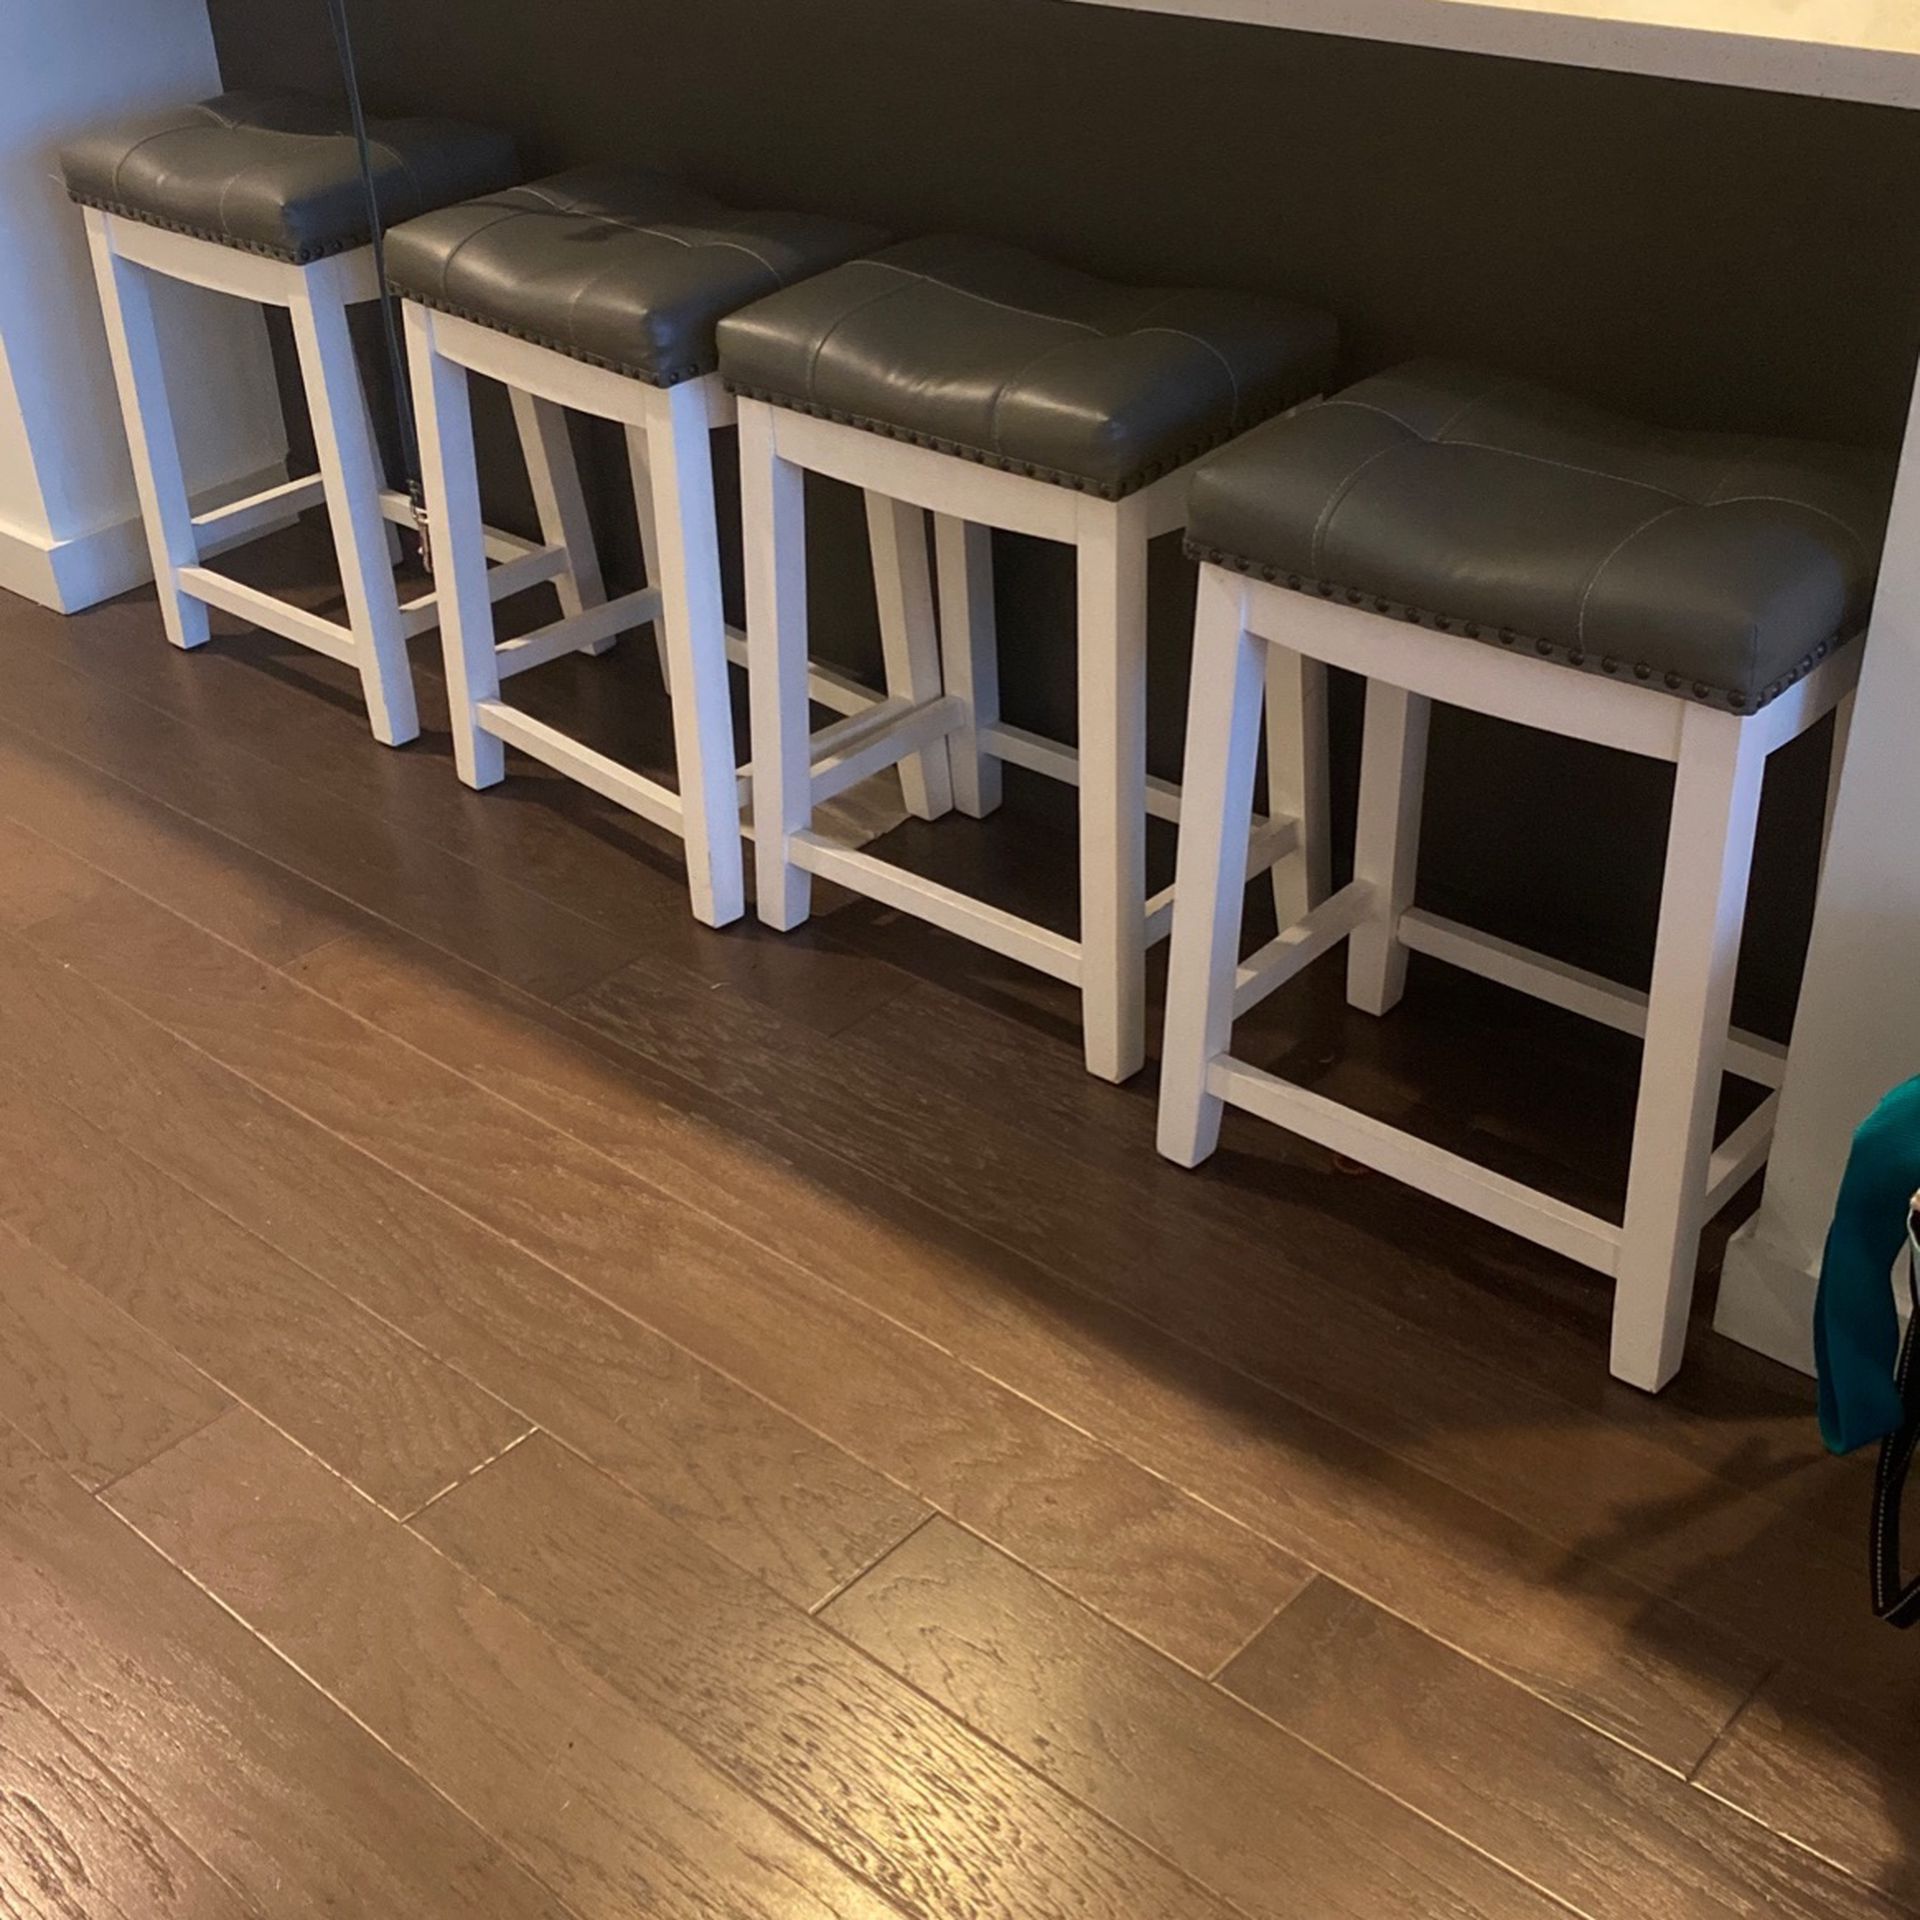 Wayfair Bar stools- 2ft Tall Leather Tops Brass Studded Sides- $125 Or Best Offer